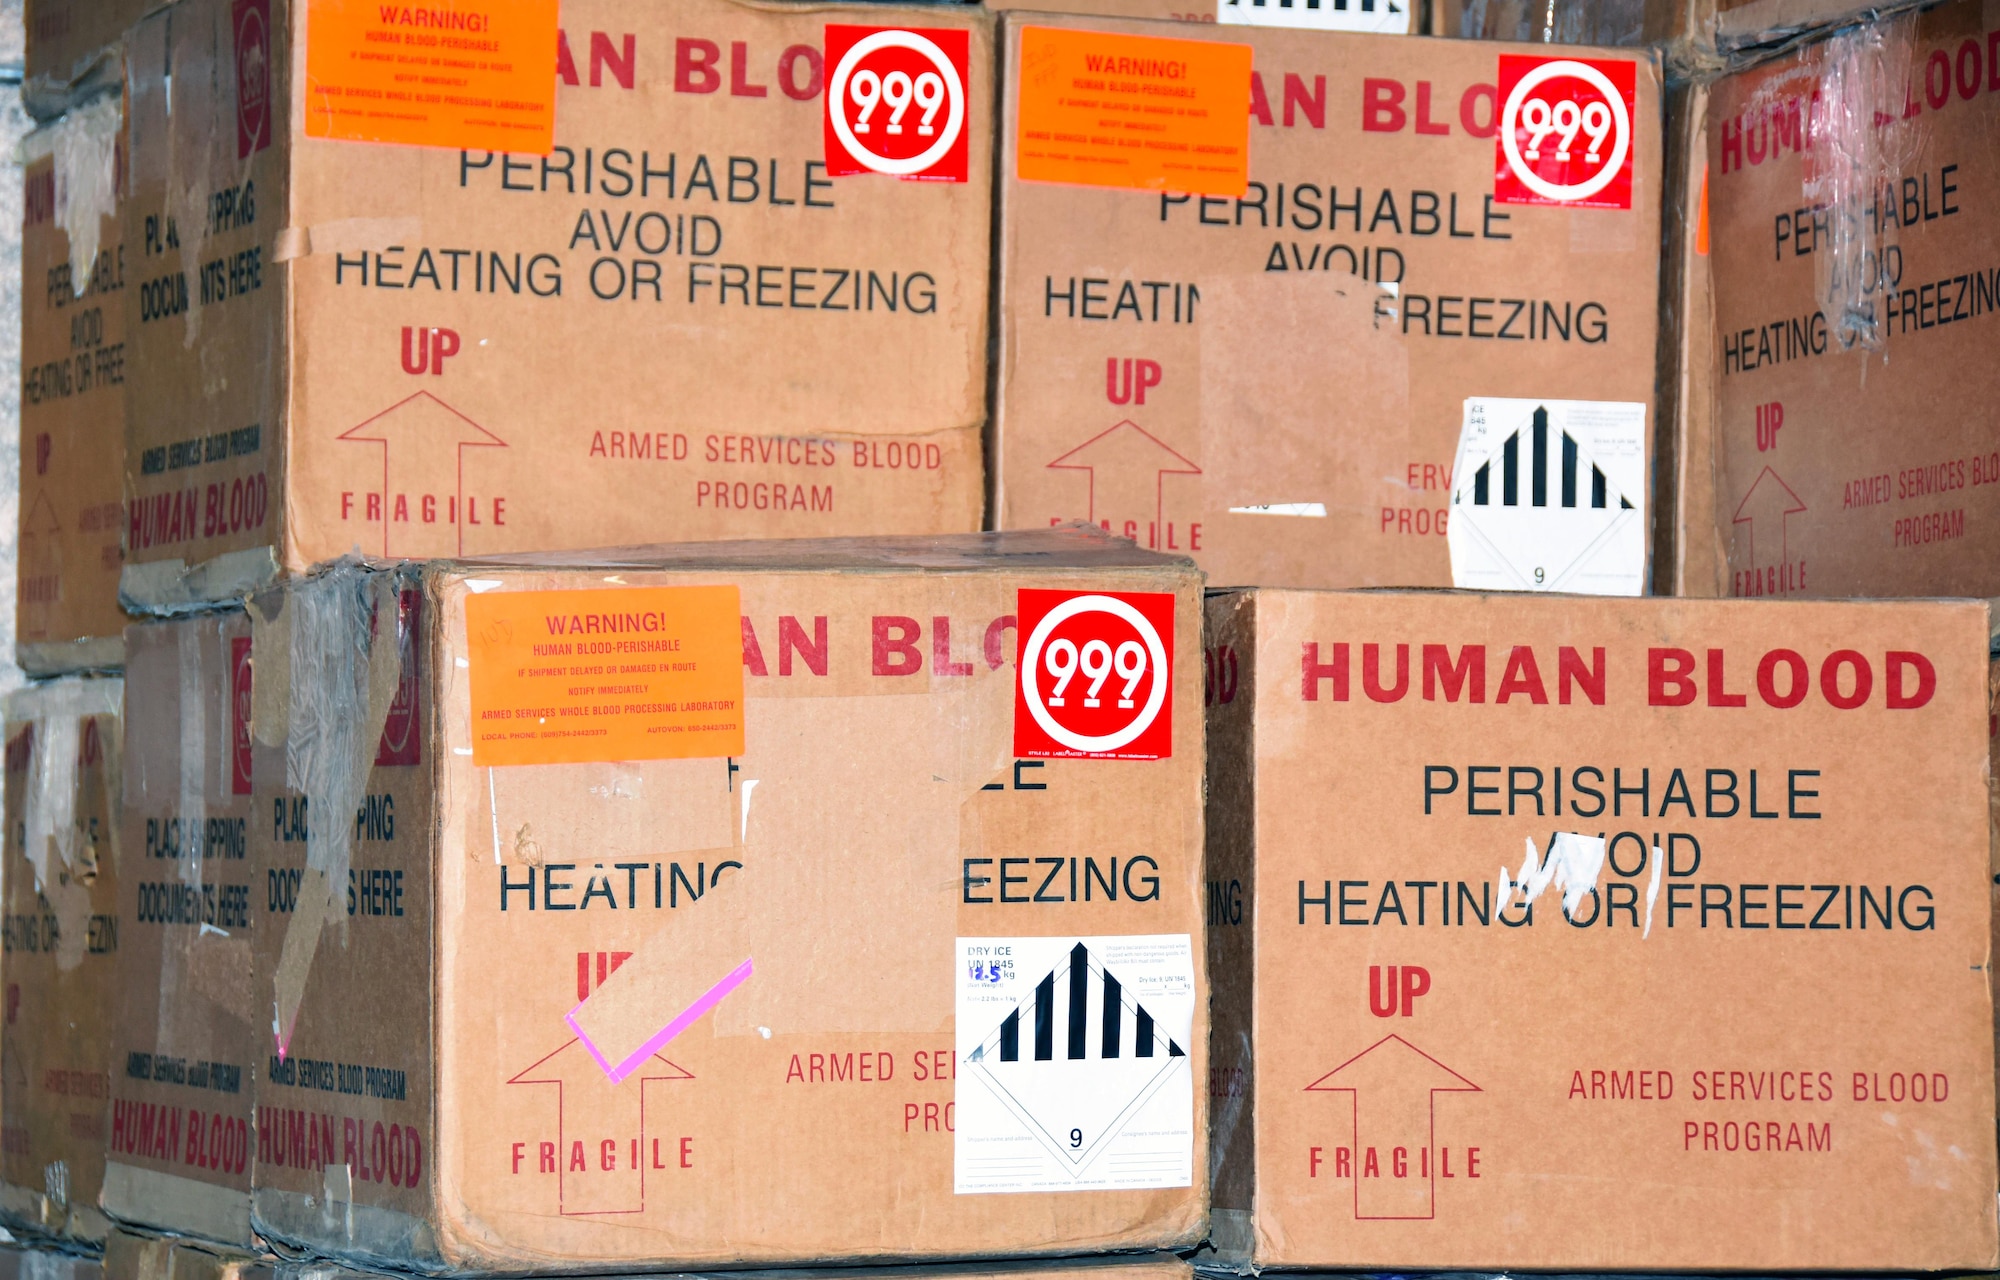 Blood shipping containers wait as Airmen with the 379th Expeditionary Medical Group blood transshipment center scan blood units to pack into the crates at Al Udeid Air Base, Qatar, Jan. 27, 2017. In one night, blood transshipment center Airmen will handle 30 to 300 blood units depending on mission requirements. (U.S. Air Force photo by Senior Airman Cynthia A. Innocenti)